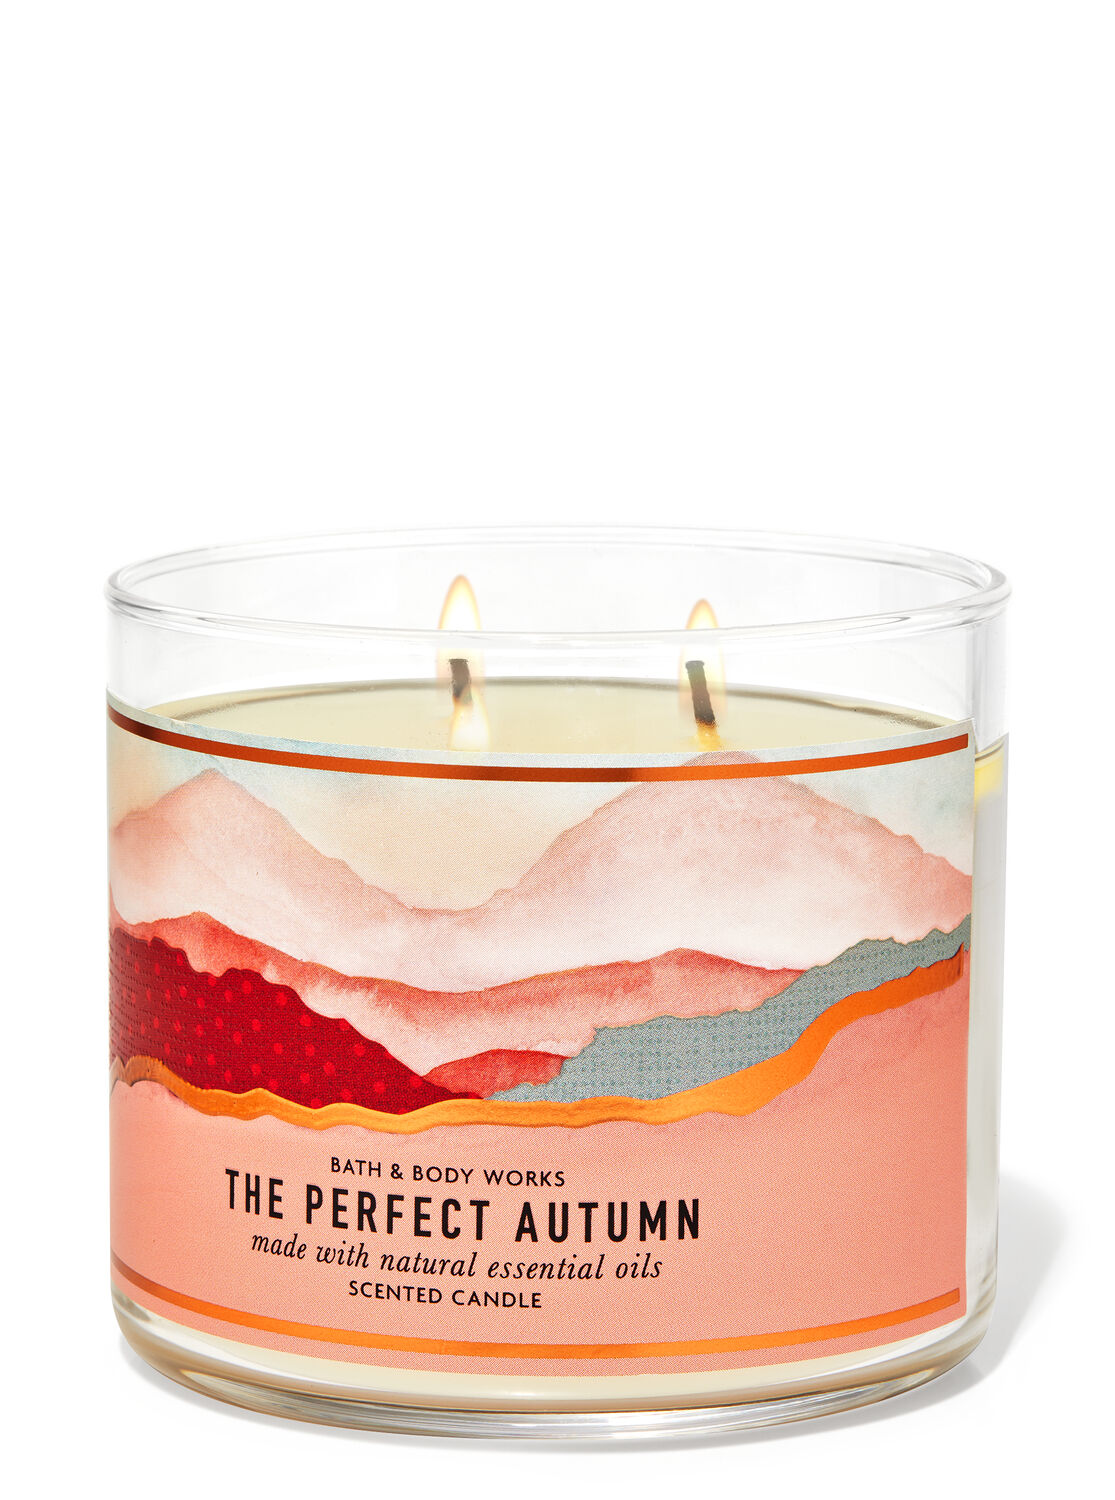 1 Bath & Body Works THE PERFECT AUTUMN Large 3-Wick SCENTED Candle 